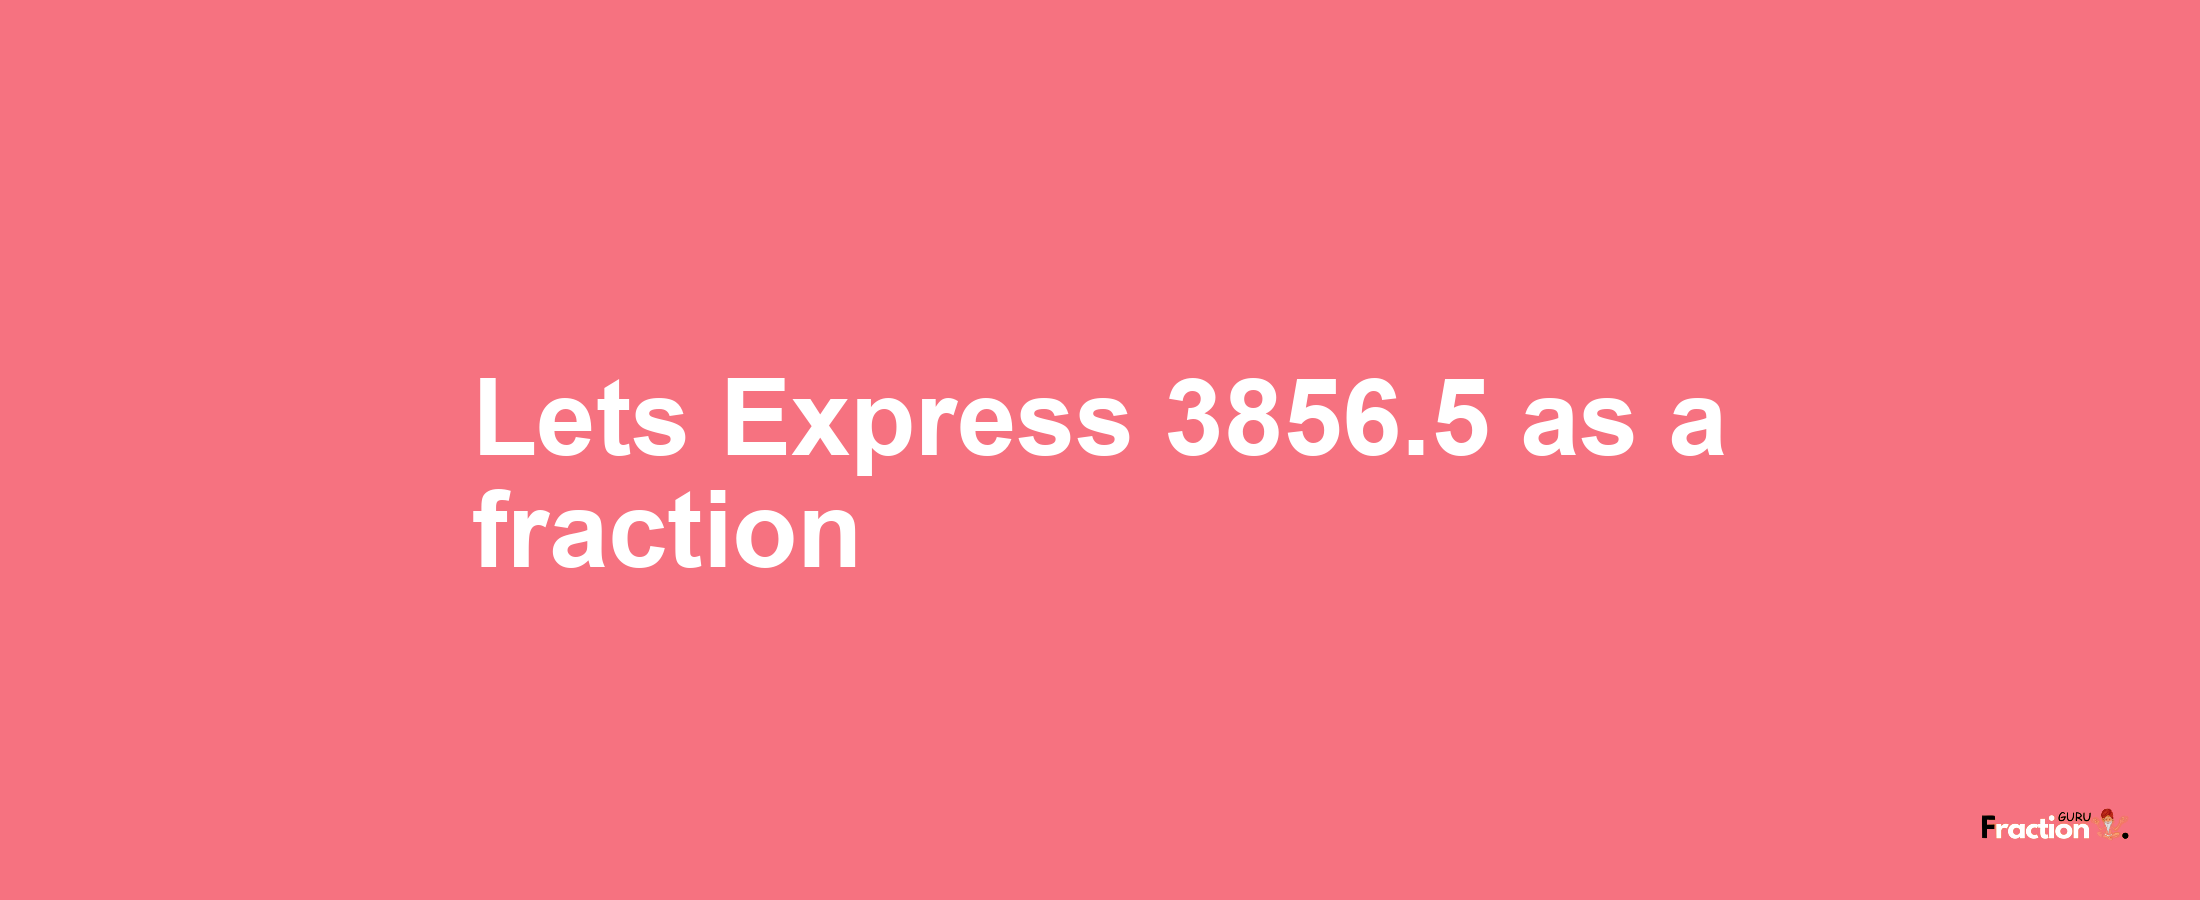 Lets Express 3856.5 as afraction